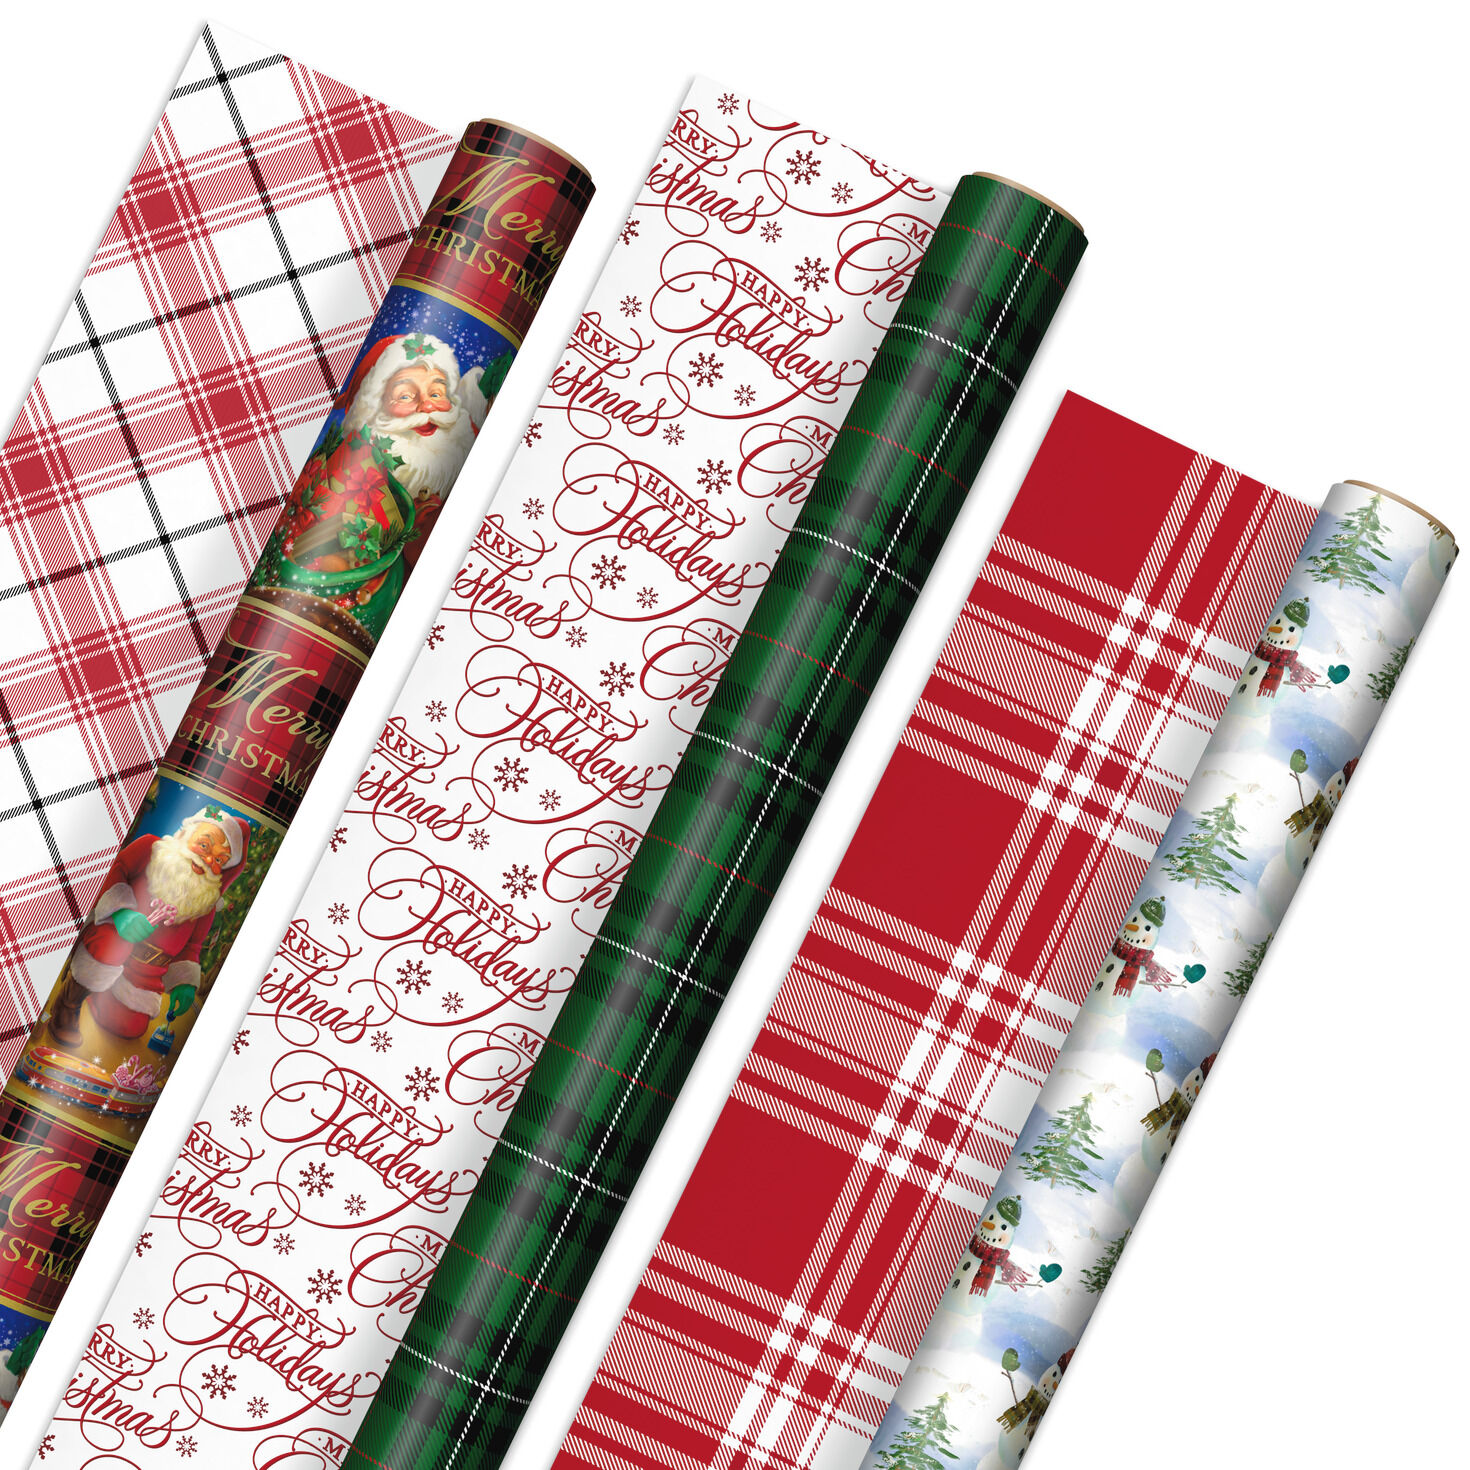 Pink and Mint Assorted 3-Pack Christmas Wrapping Paper, 120 sq. ft. -  Wrapping Paper - Hallmark